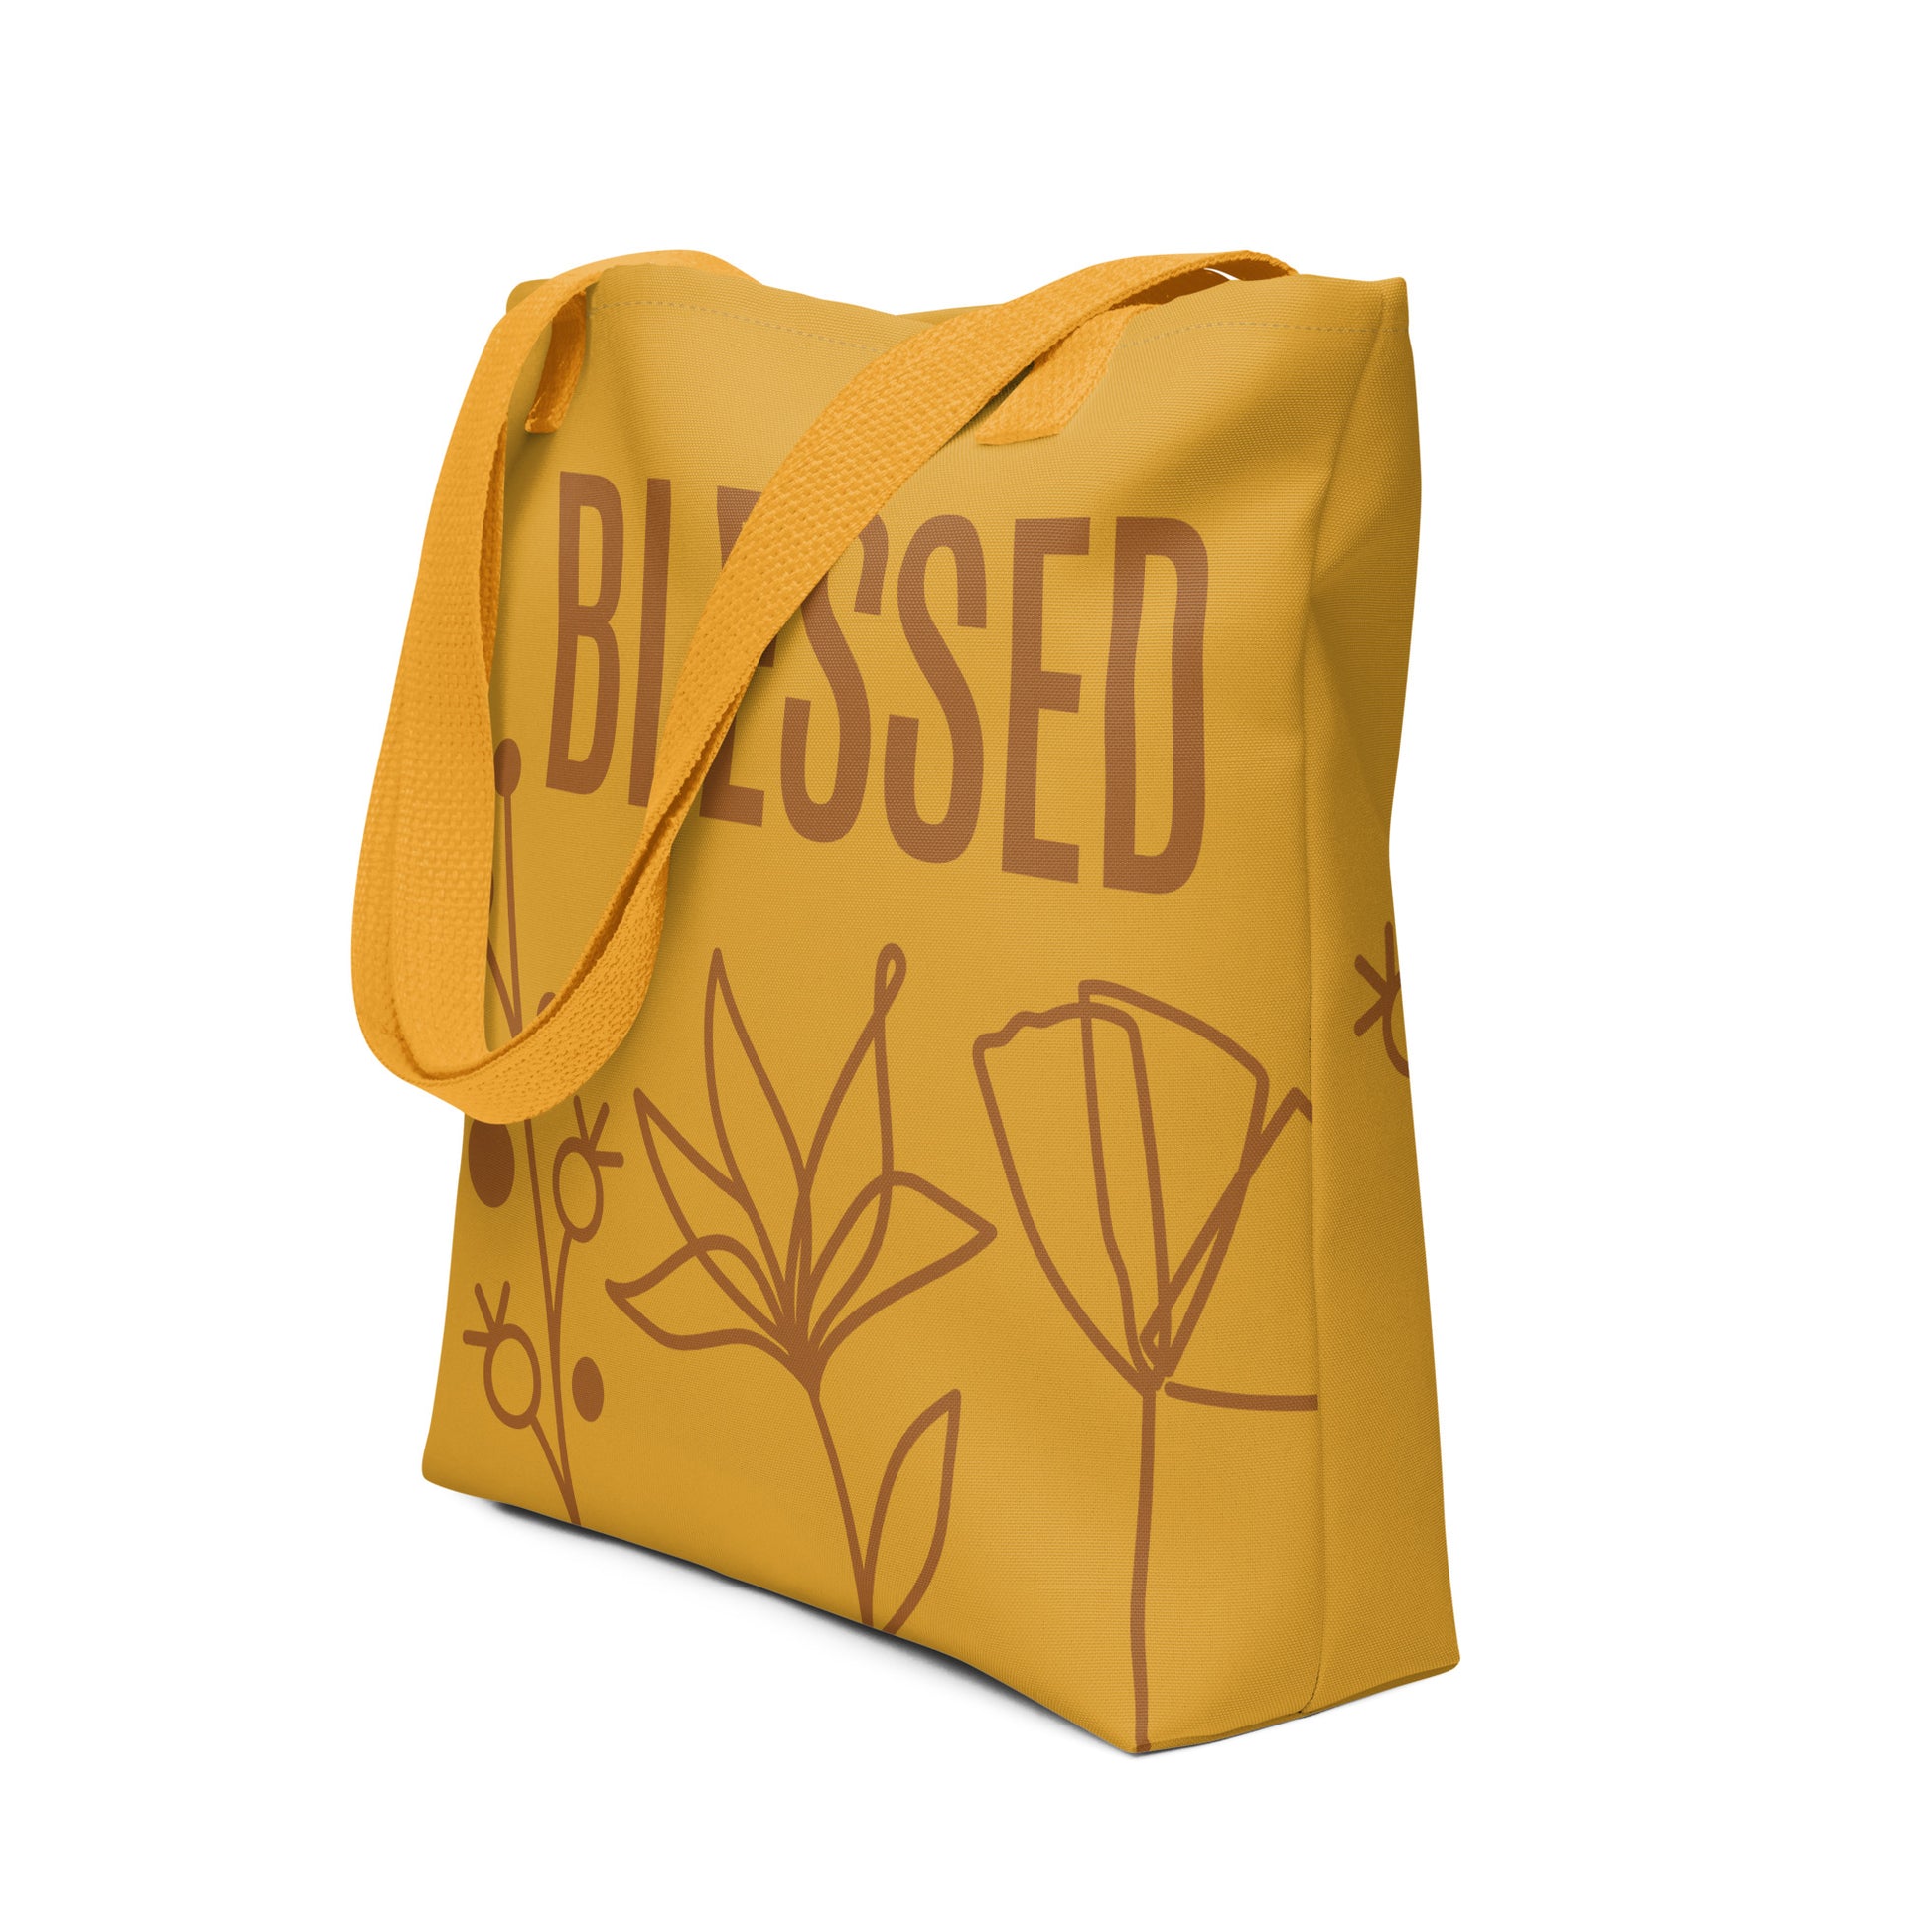 Yellow tote bag, with BLESSED text, and flower monoline design